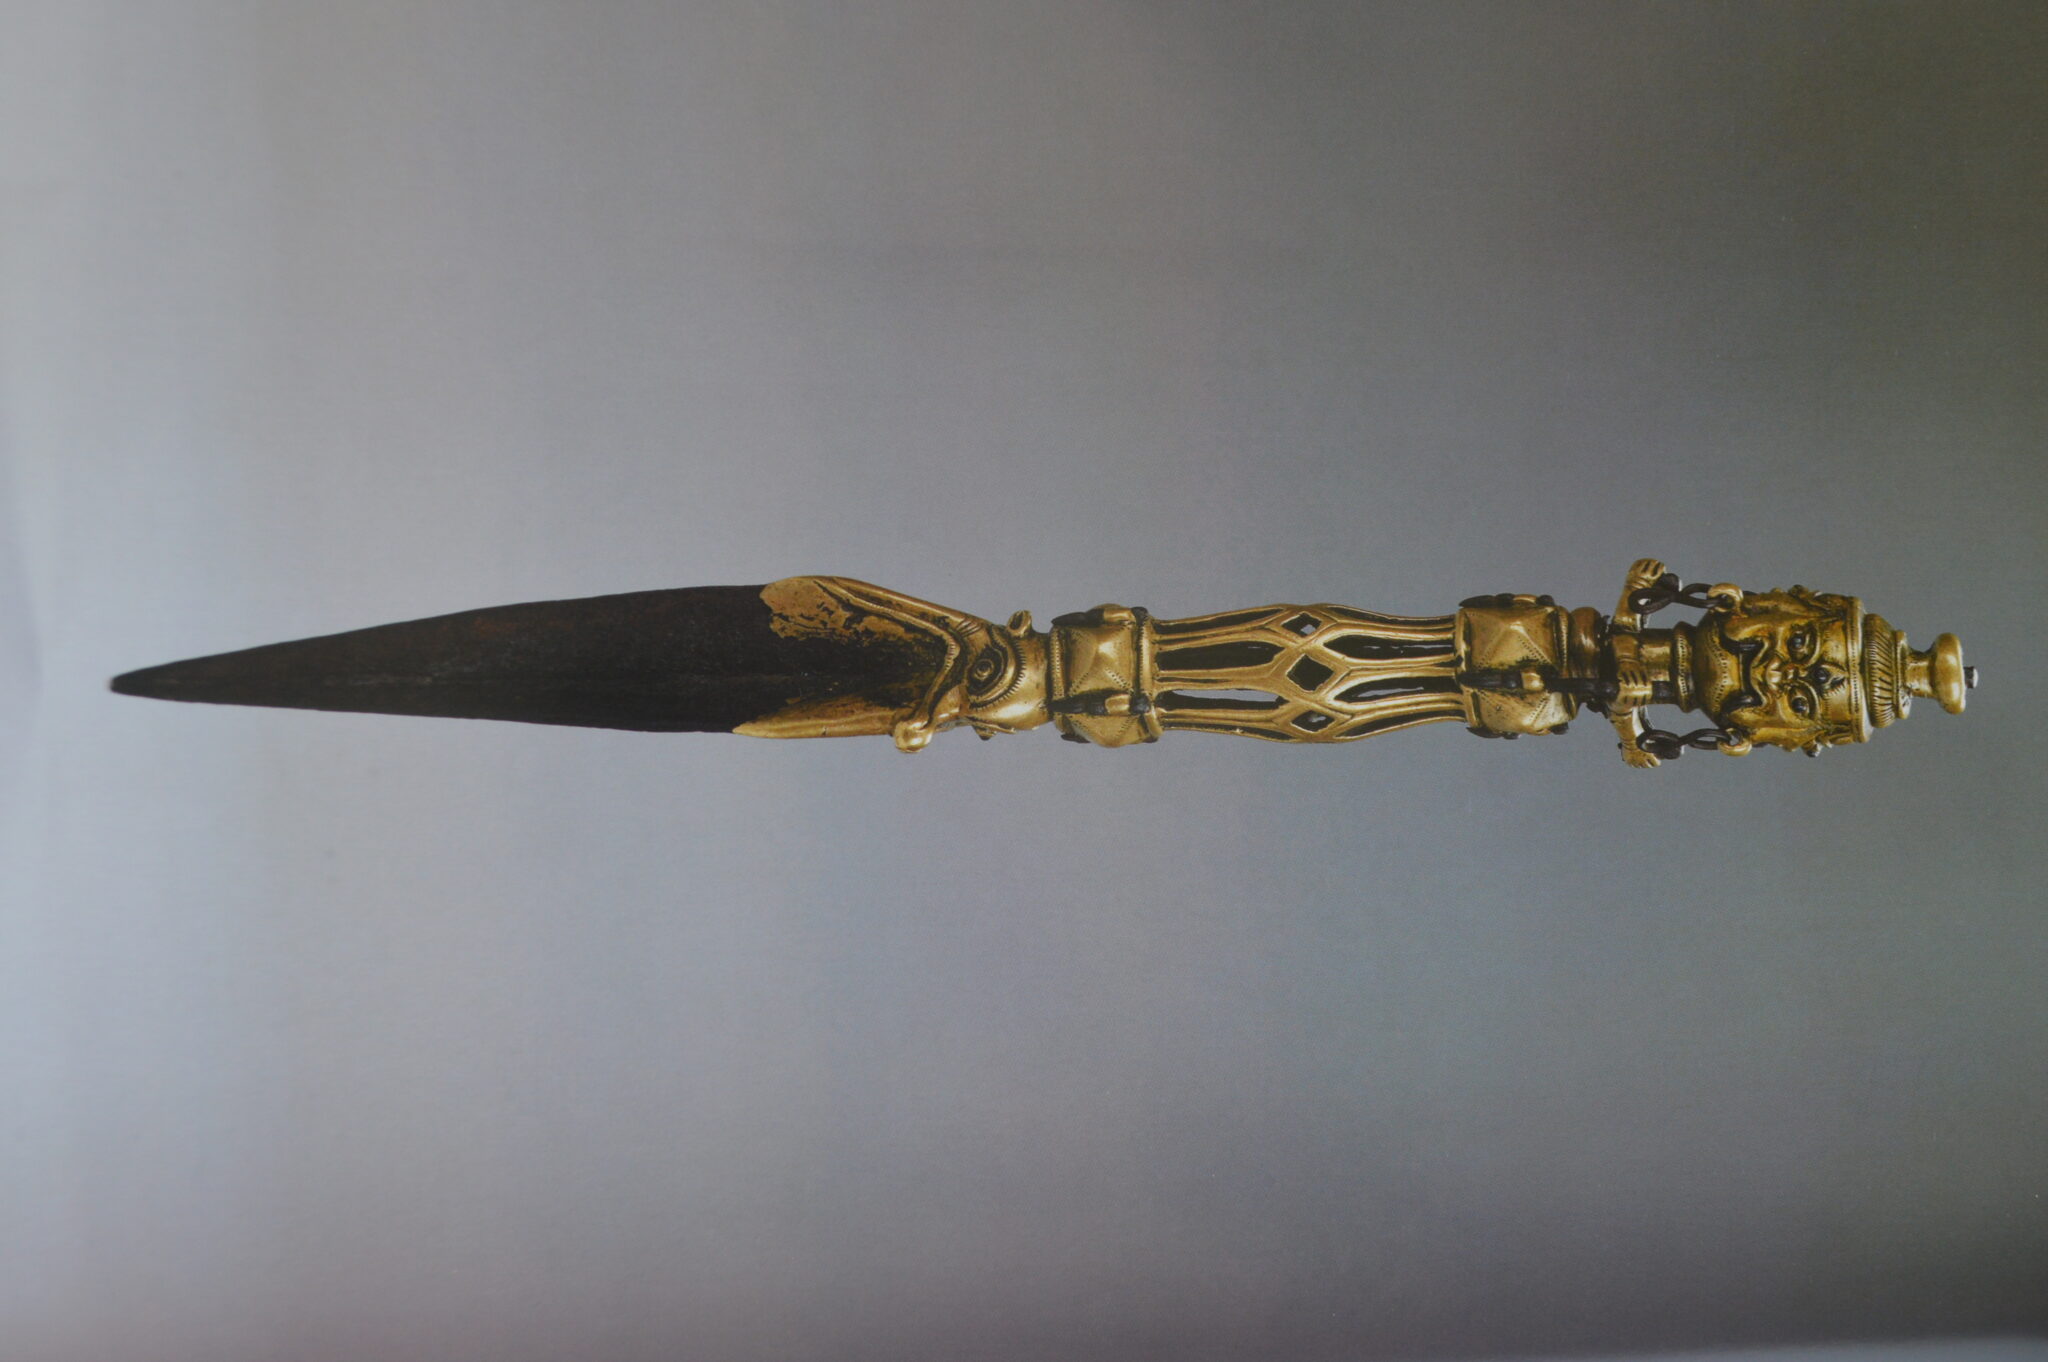 Brass-colored dagger with sharp, darkened blade; features open metalwork hilt and anthropomorphic face at pommel